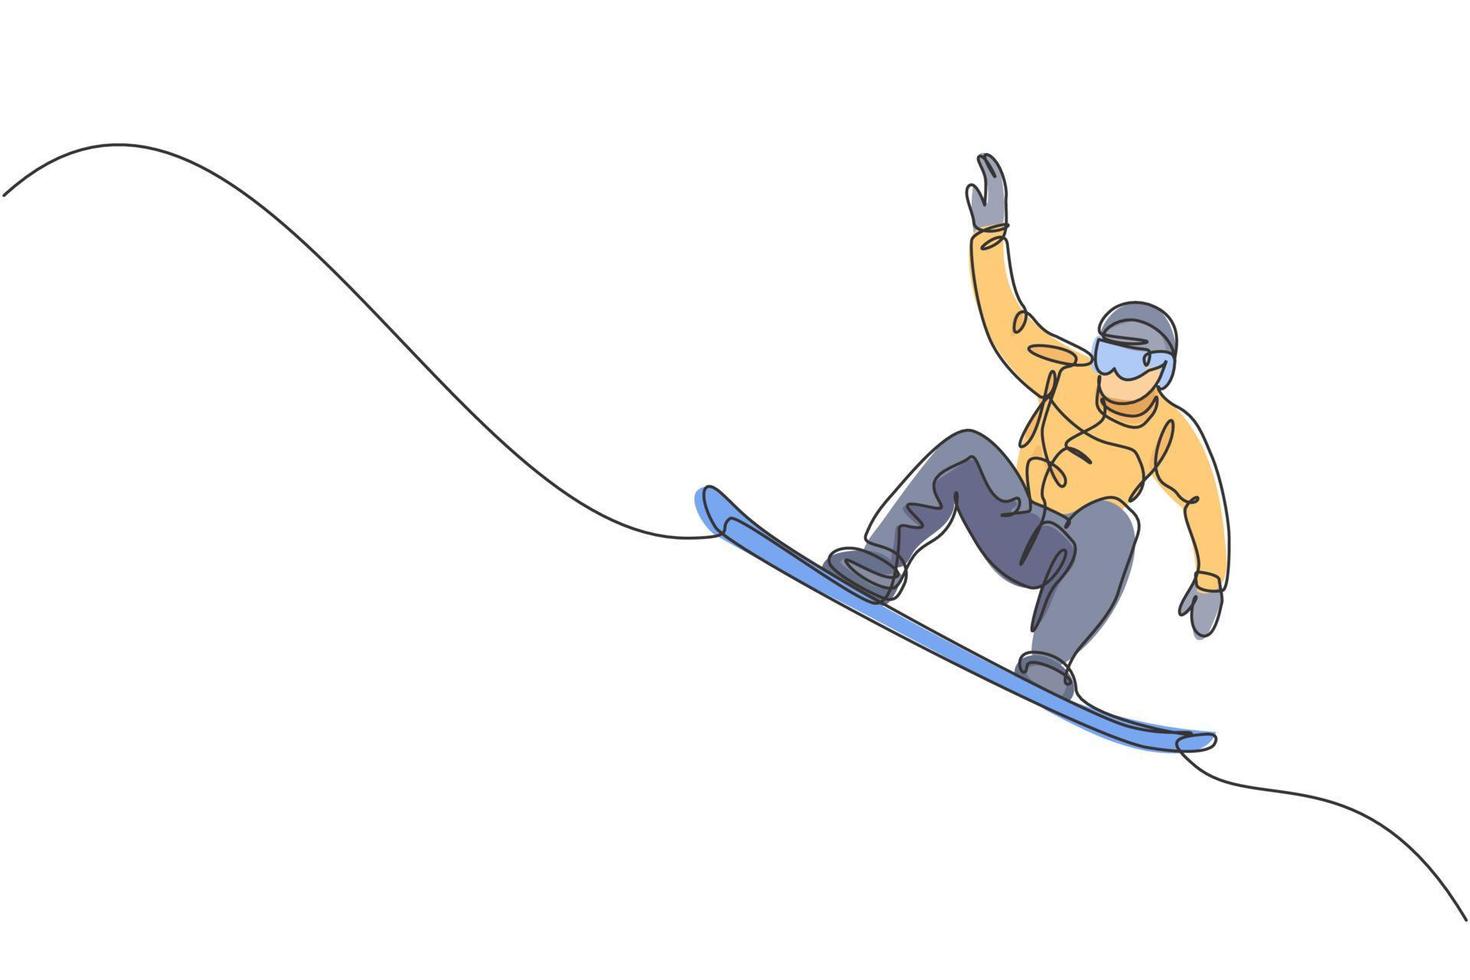 One continuous line drawing of young sporty man snowboarder riding snowboard and jumping alps snowy powder mountain. Winter lifestyle sport concept. Dynamic single line draw design vector illustration